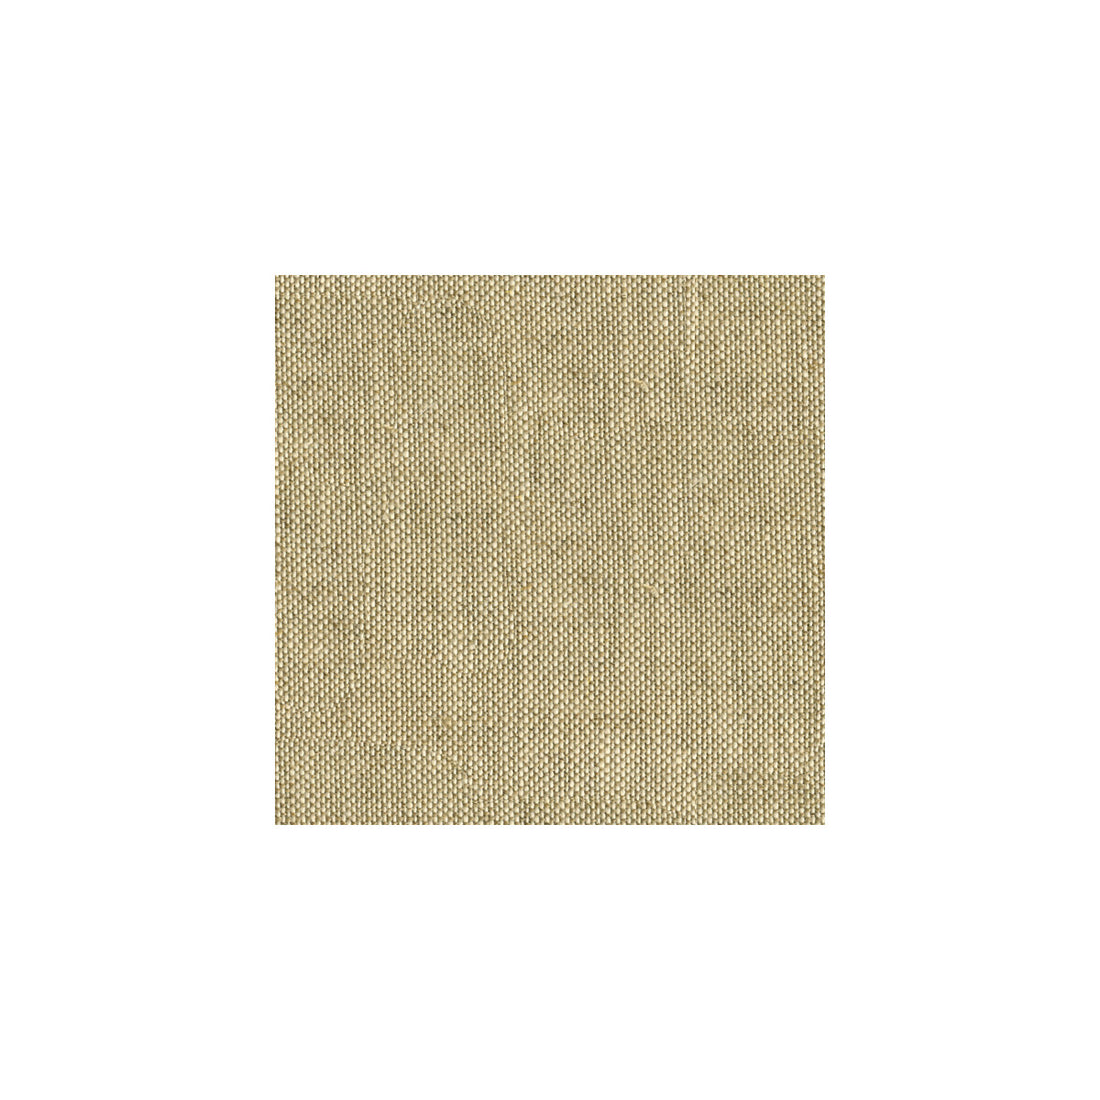 Heman fabric in linen color - pattern 32839.16.0 - by Kravet Basics in the Thom Filicia collection